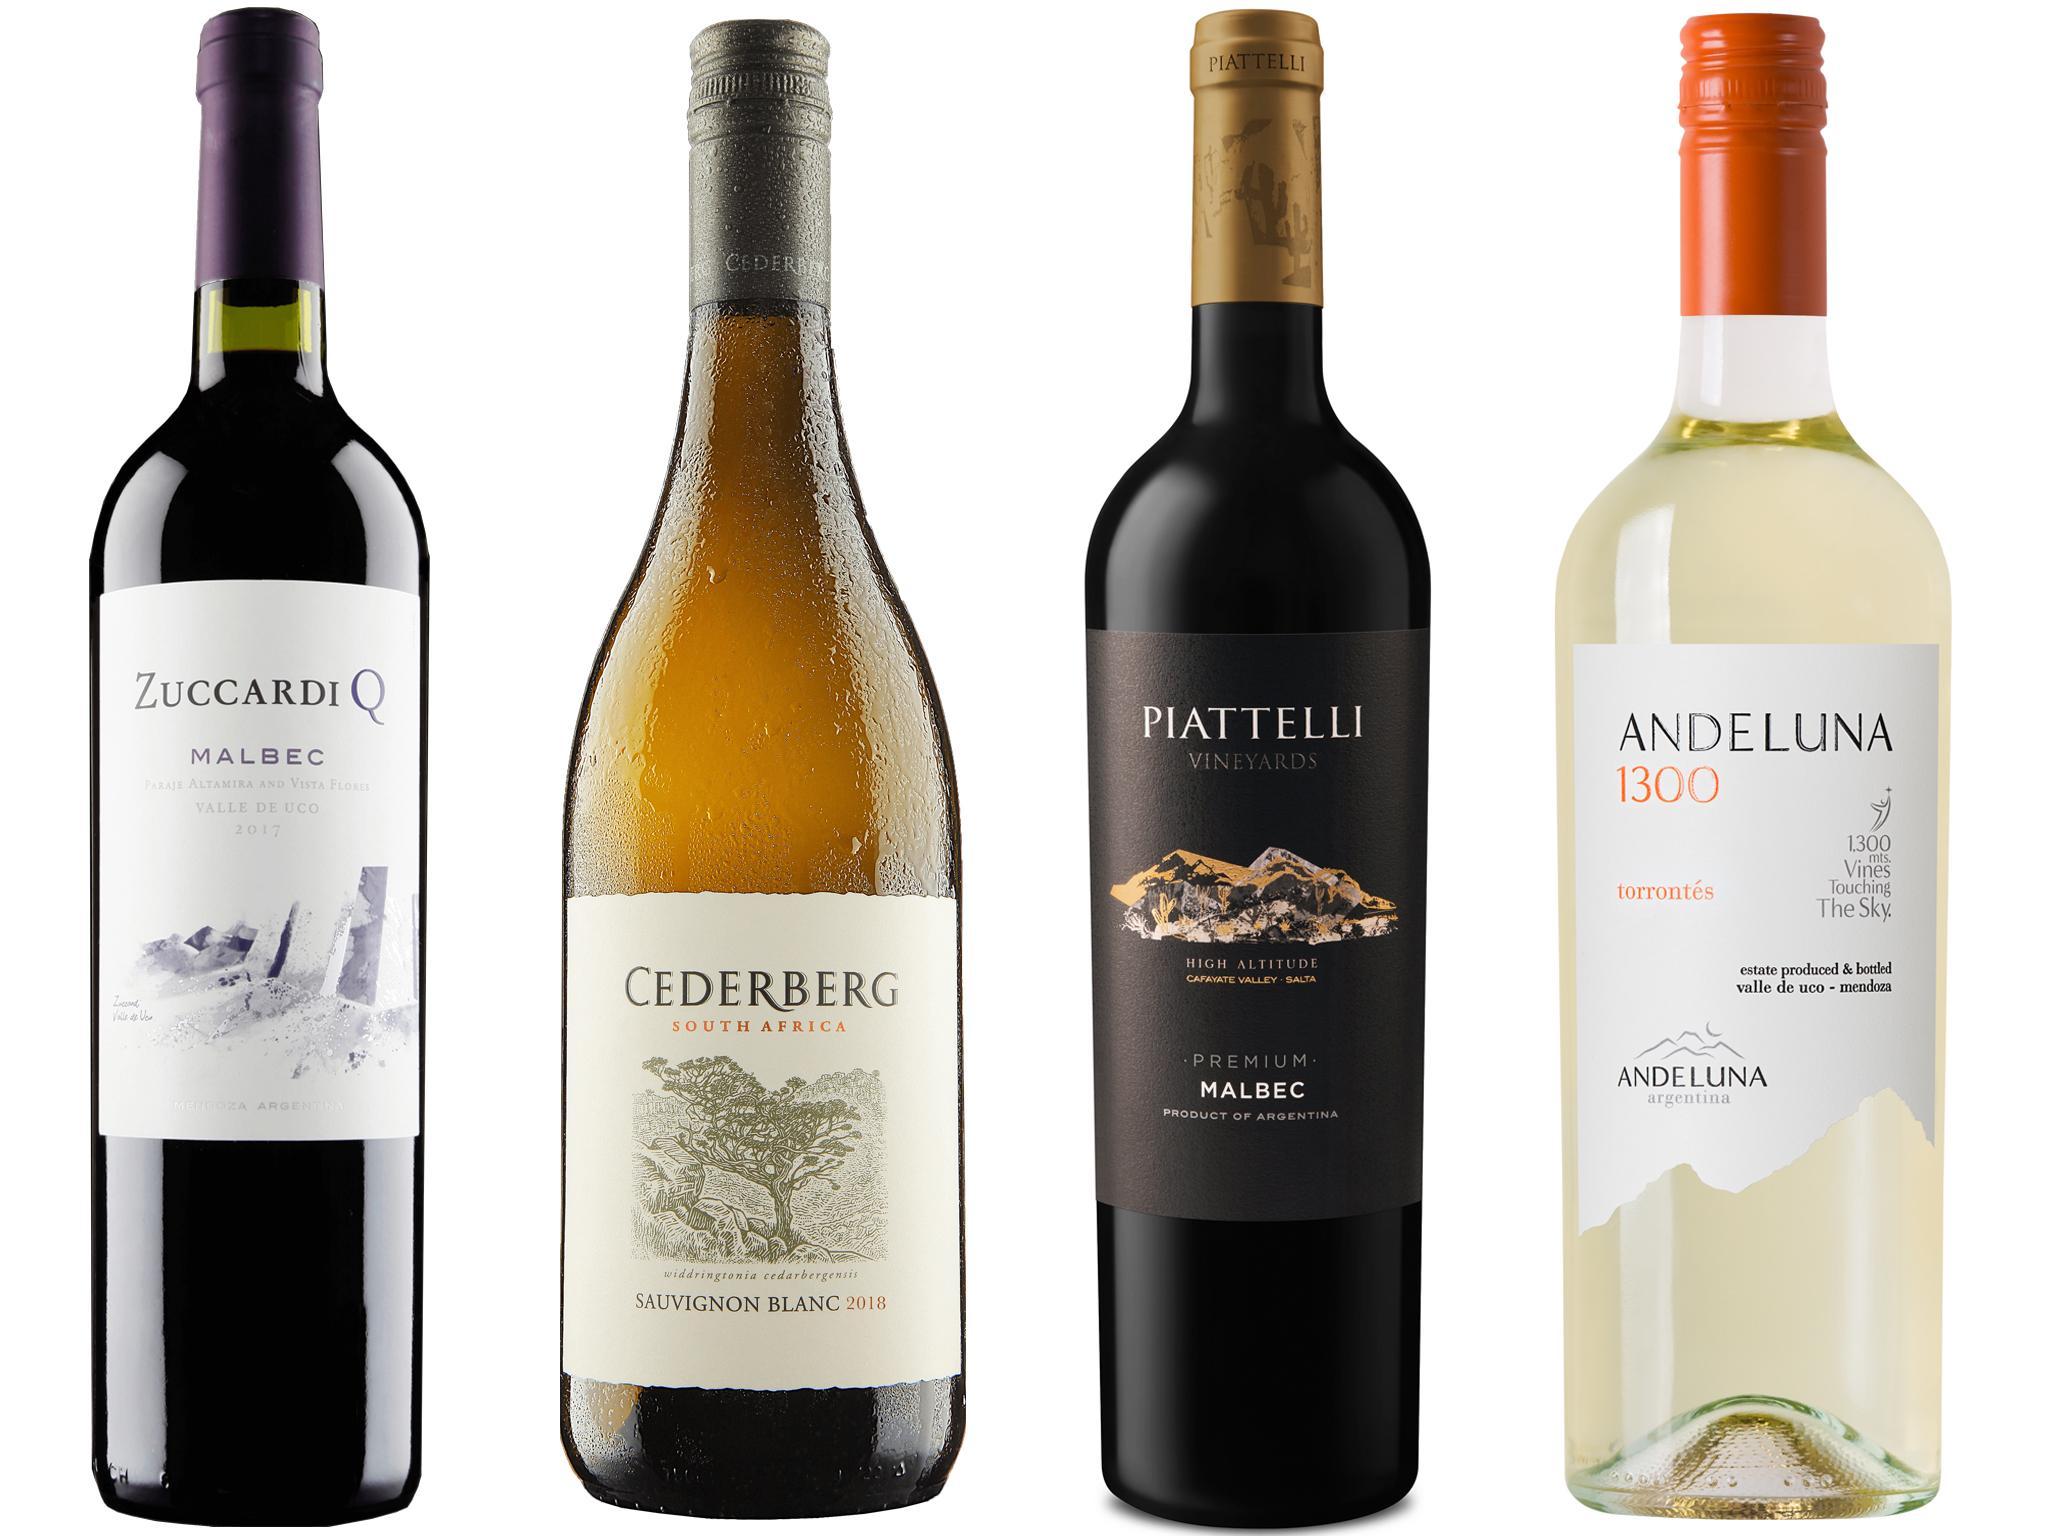 8 Wines From High-altitude Vineyards photo